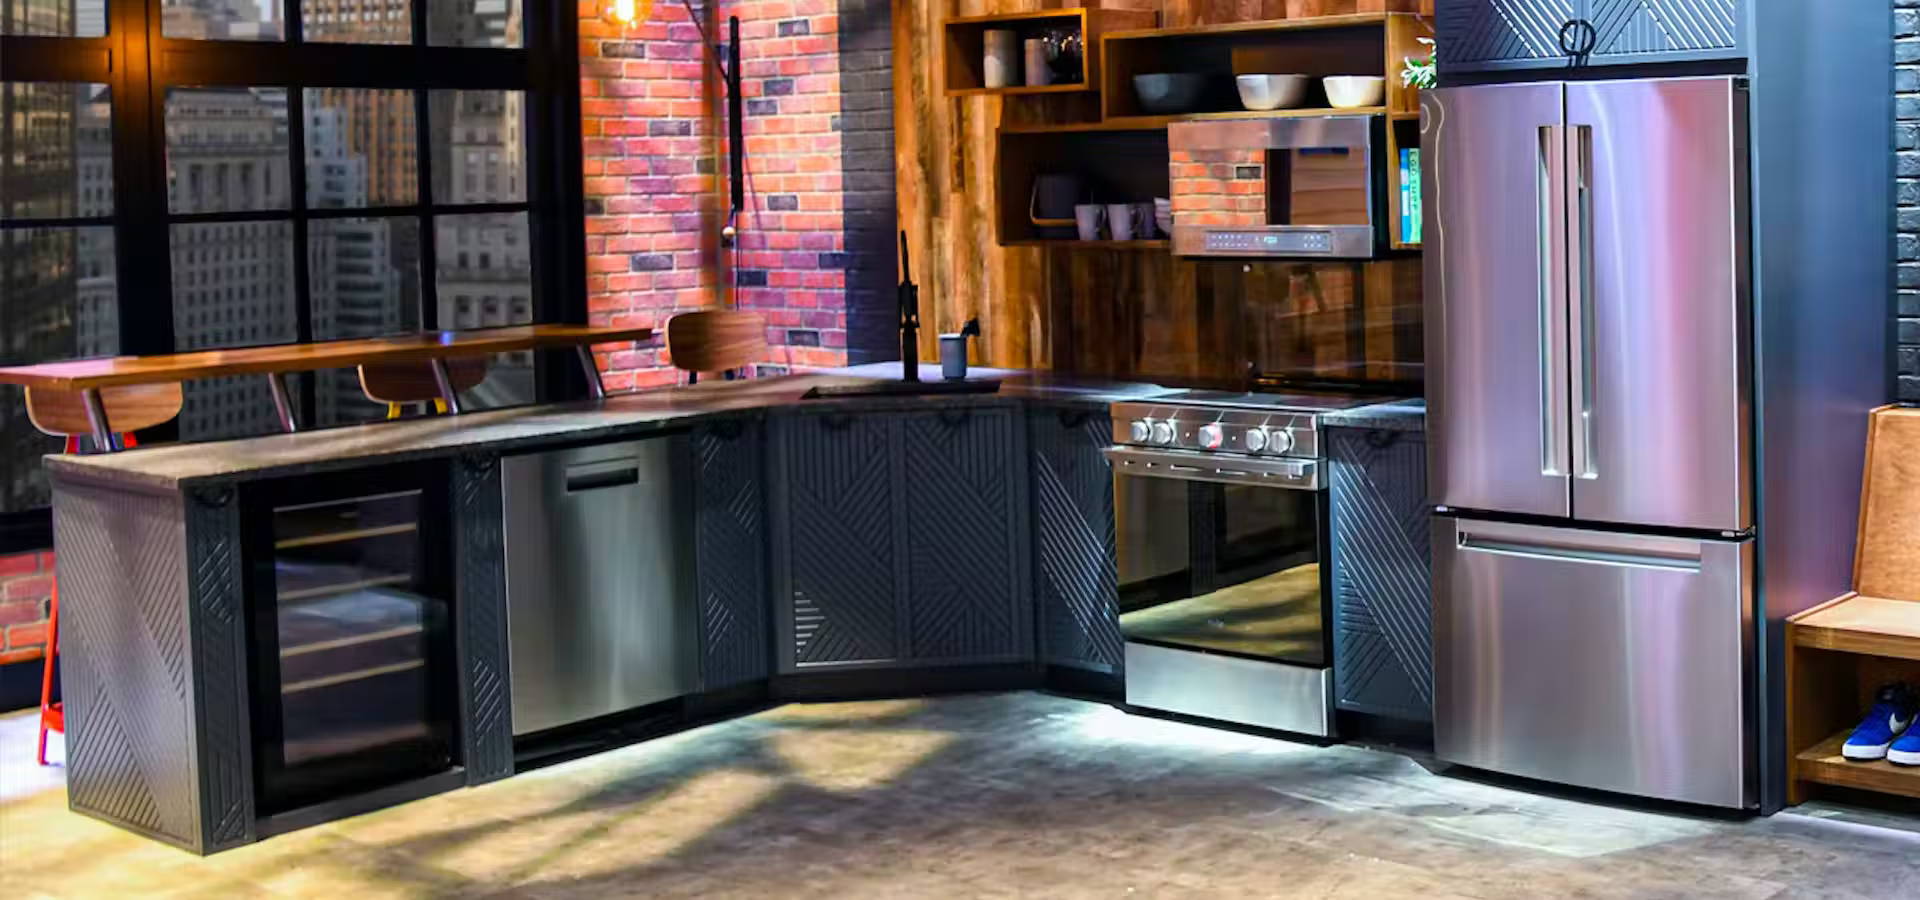 Haier full-size kitchen appliances in a modern loft kitchen with stackable laundry pair.